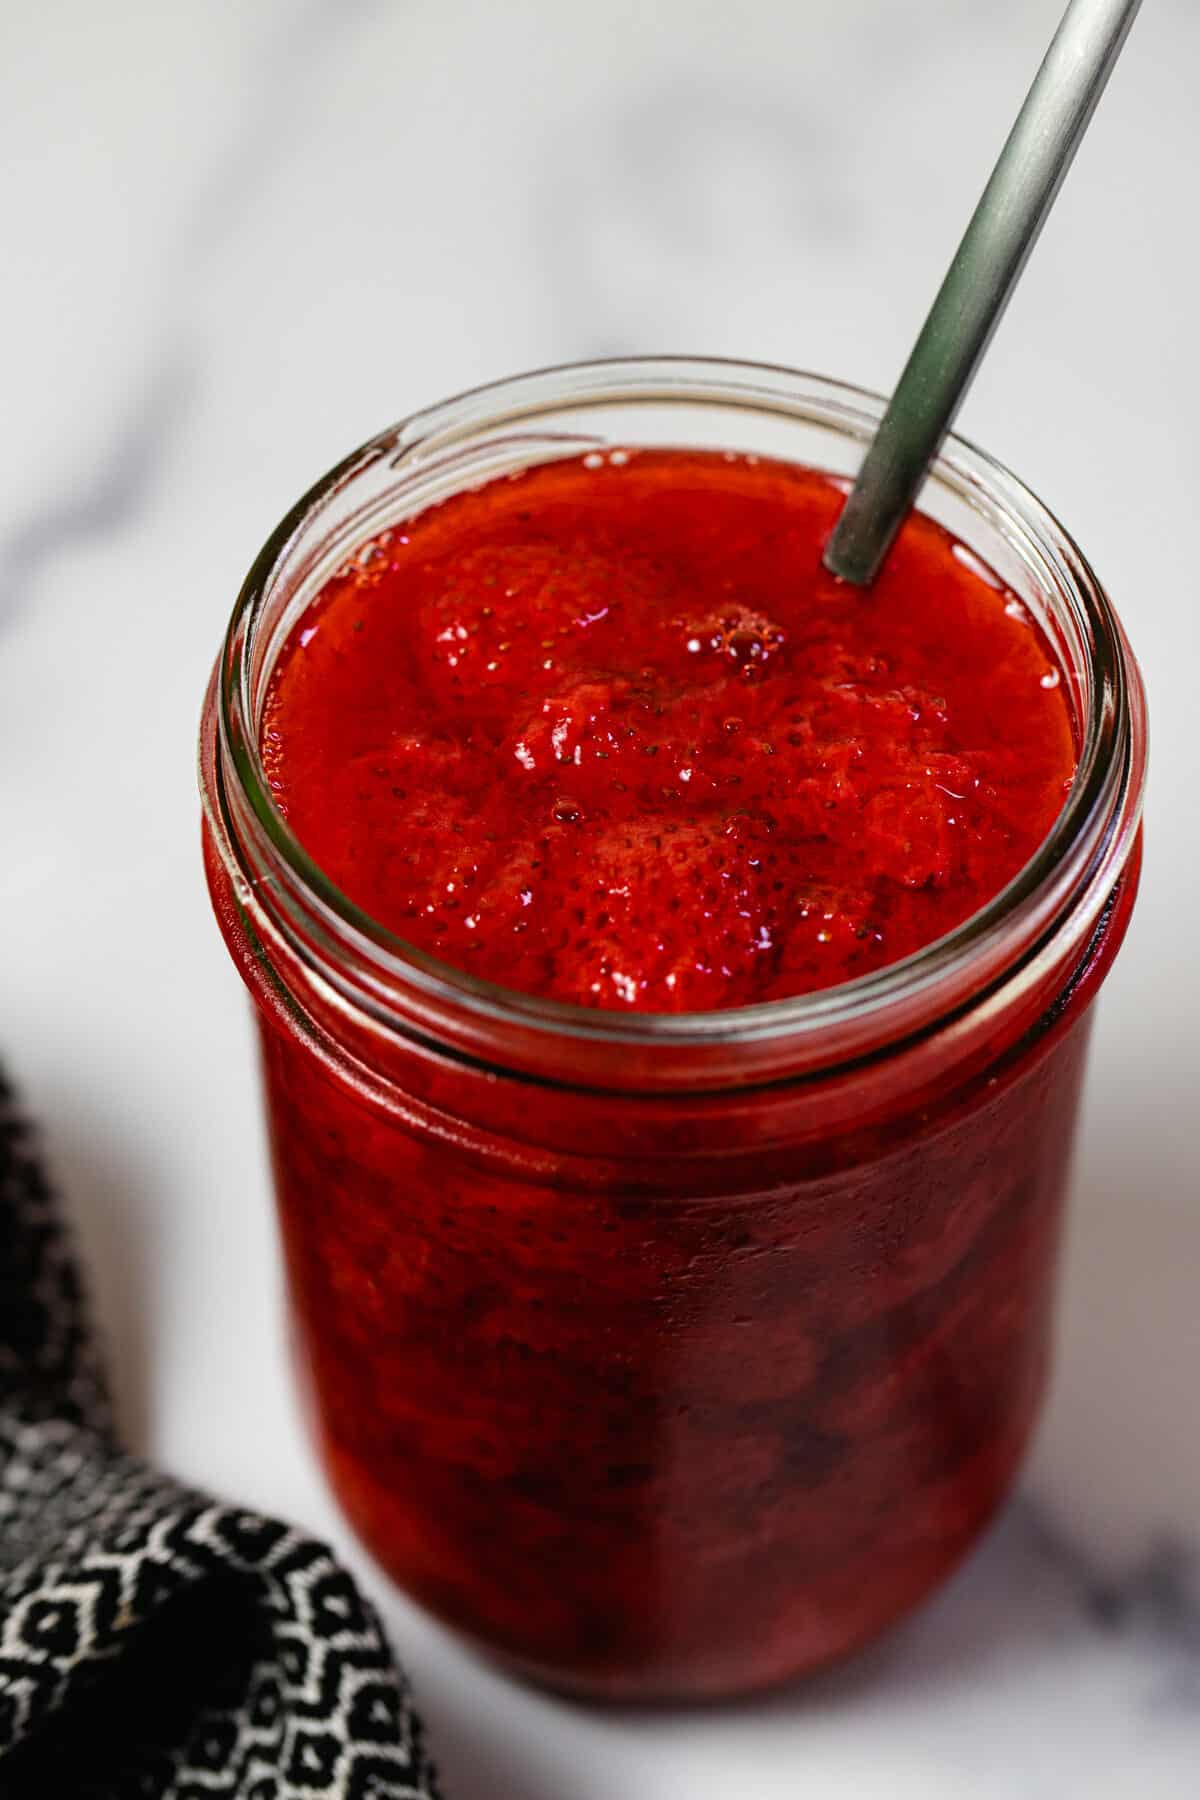 Wide mouth mason jar filled with homemade strawberry sauce